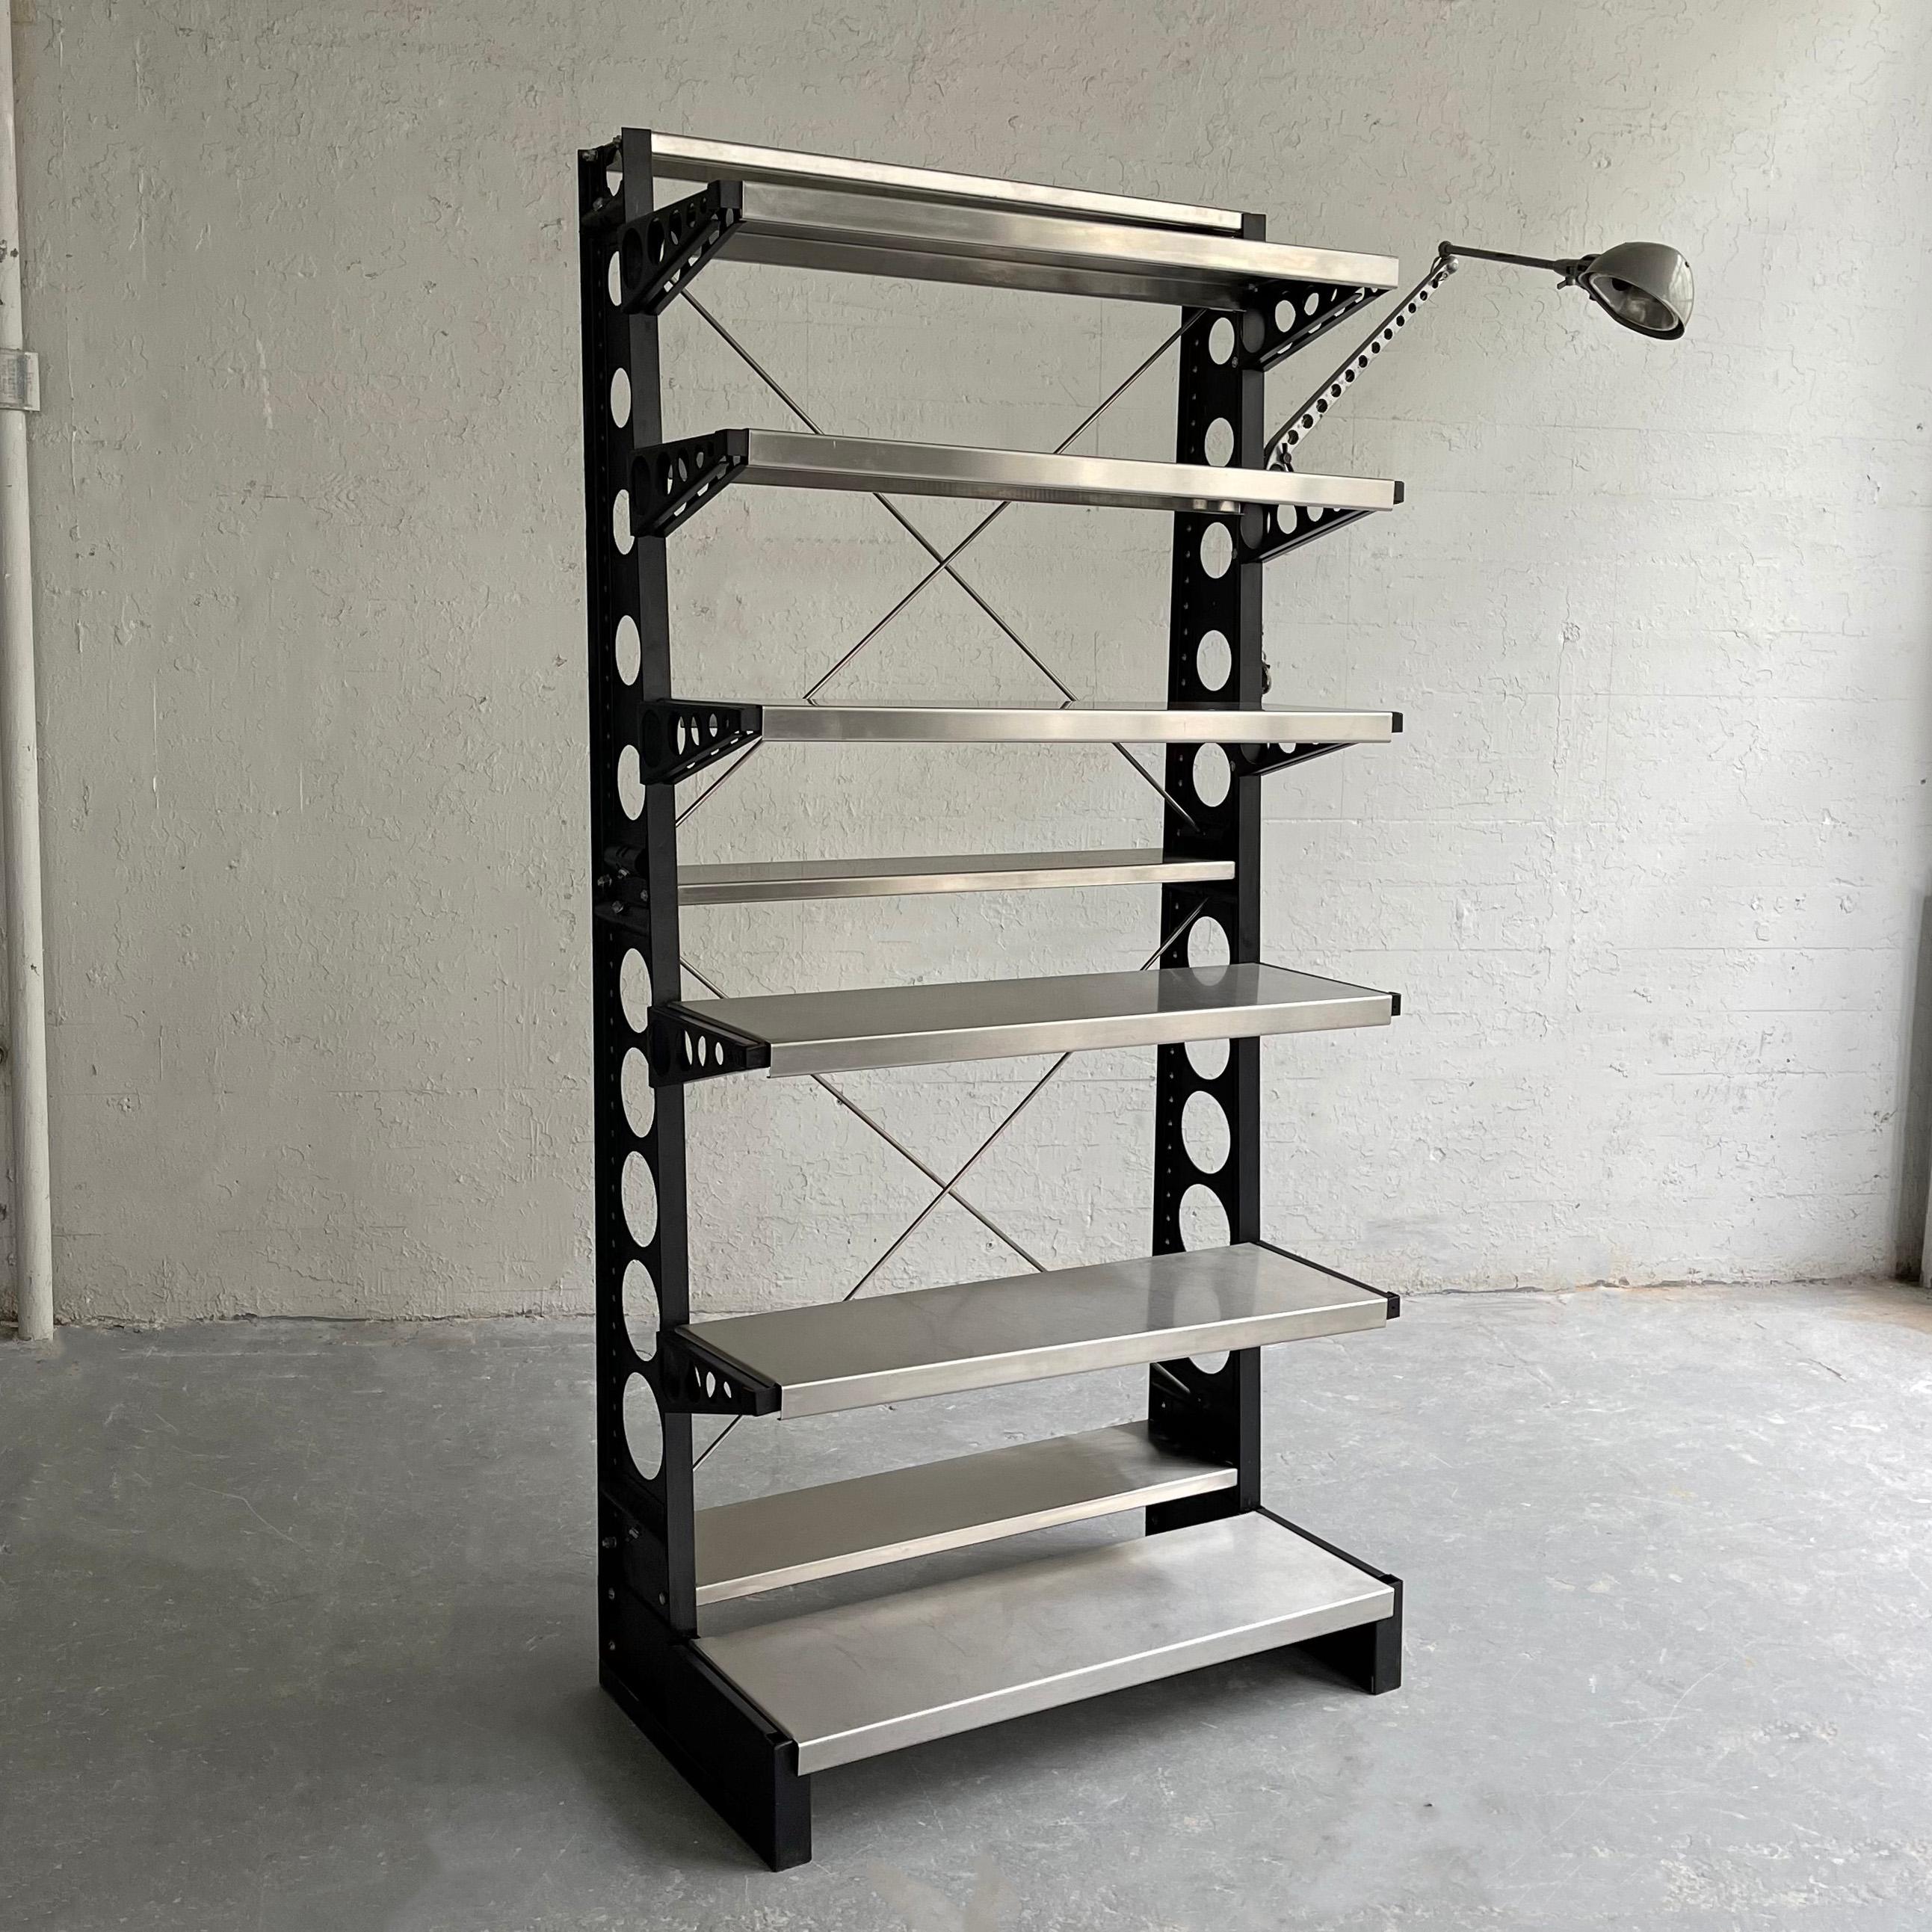 Industrial, open shelving unit with attached 41 inch task lamp features circular perforated steel uprights with 9 stainless steel shelves. The front shelves are 12 inches deep and the back shelves are 7.5 inches deep with 13.5 inches of clearance